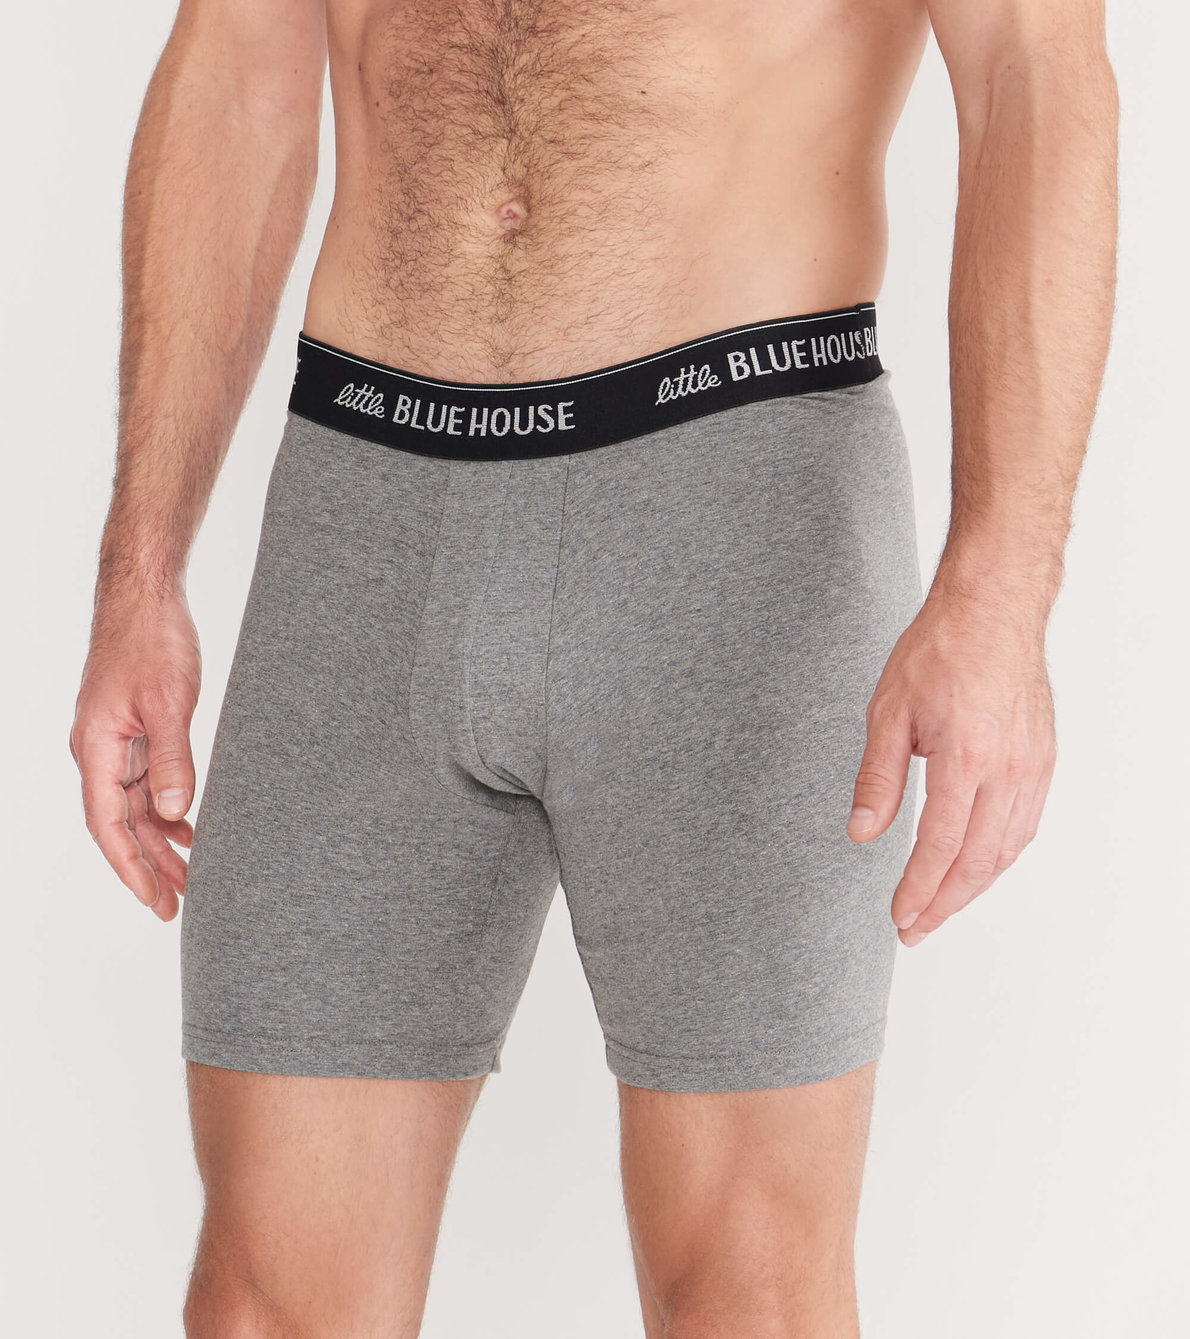 View larger image of Game Fish Men's Boxer Briefs